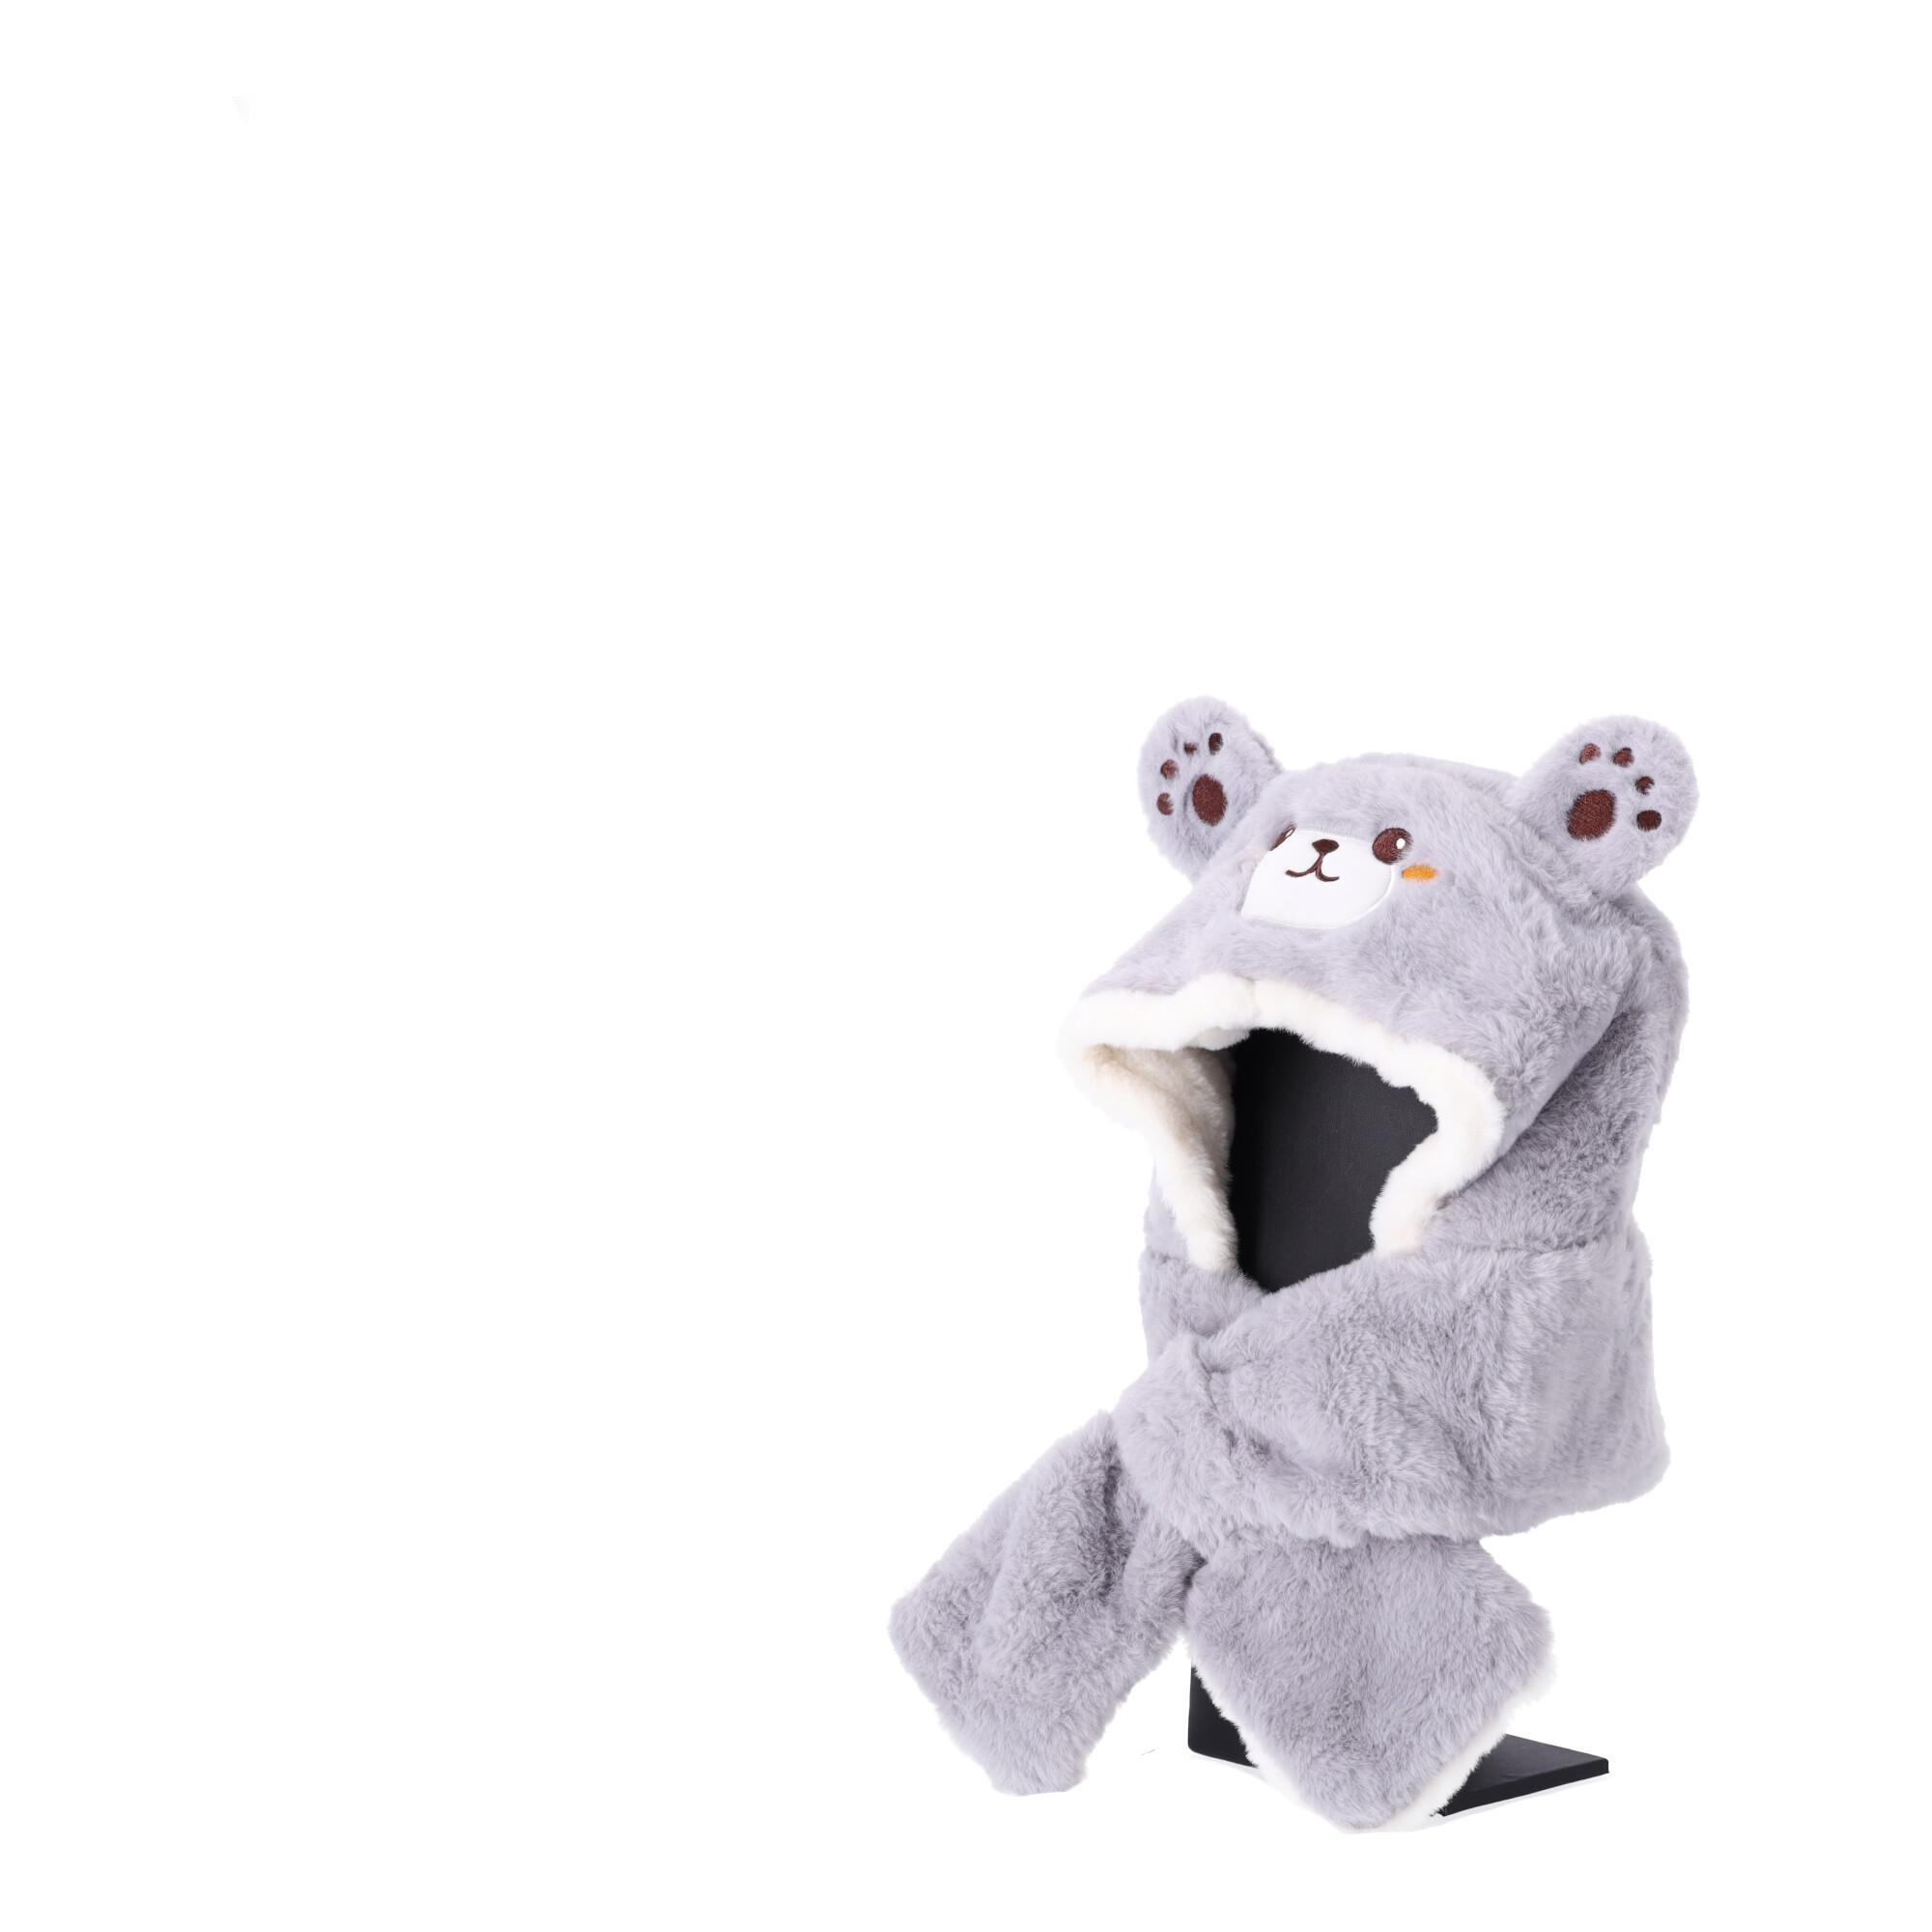 Children's plush hat with a scarf for children aged 1 to 8 –grey Bear